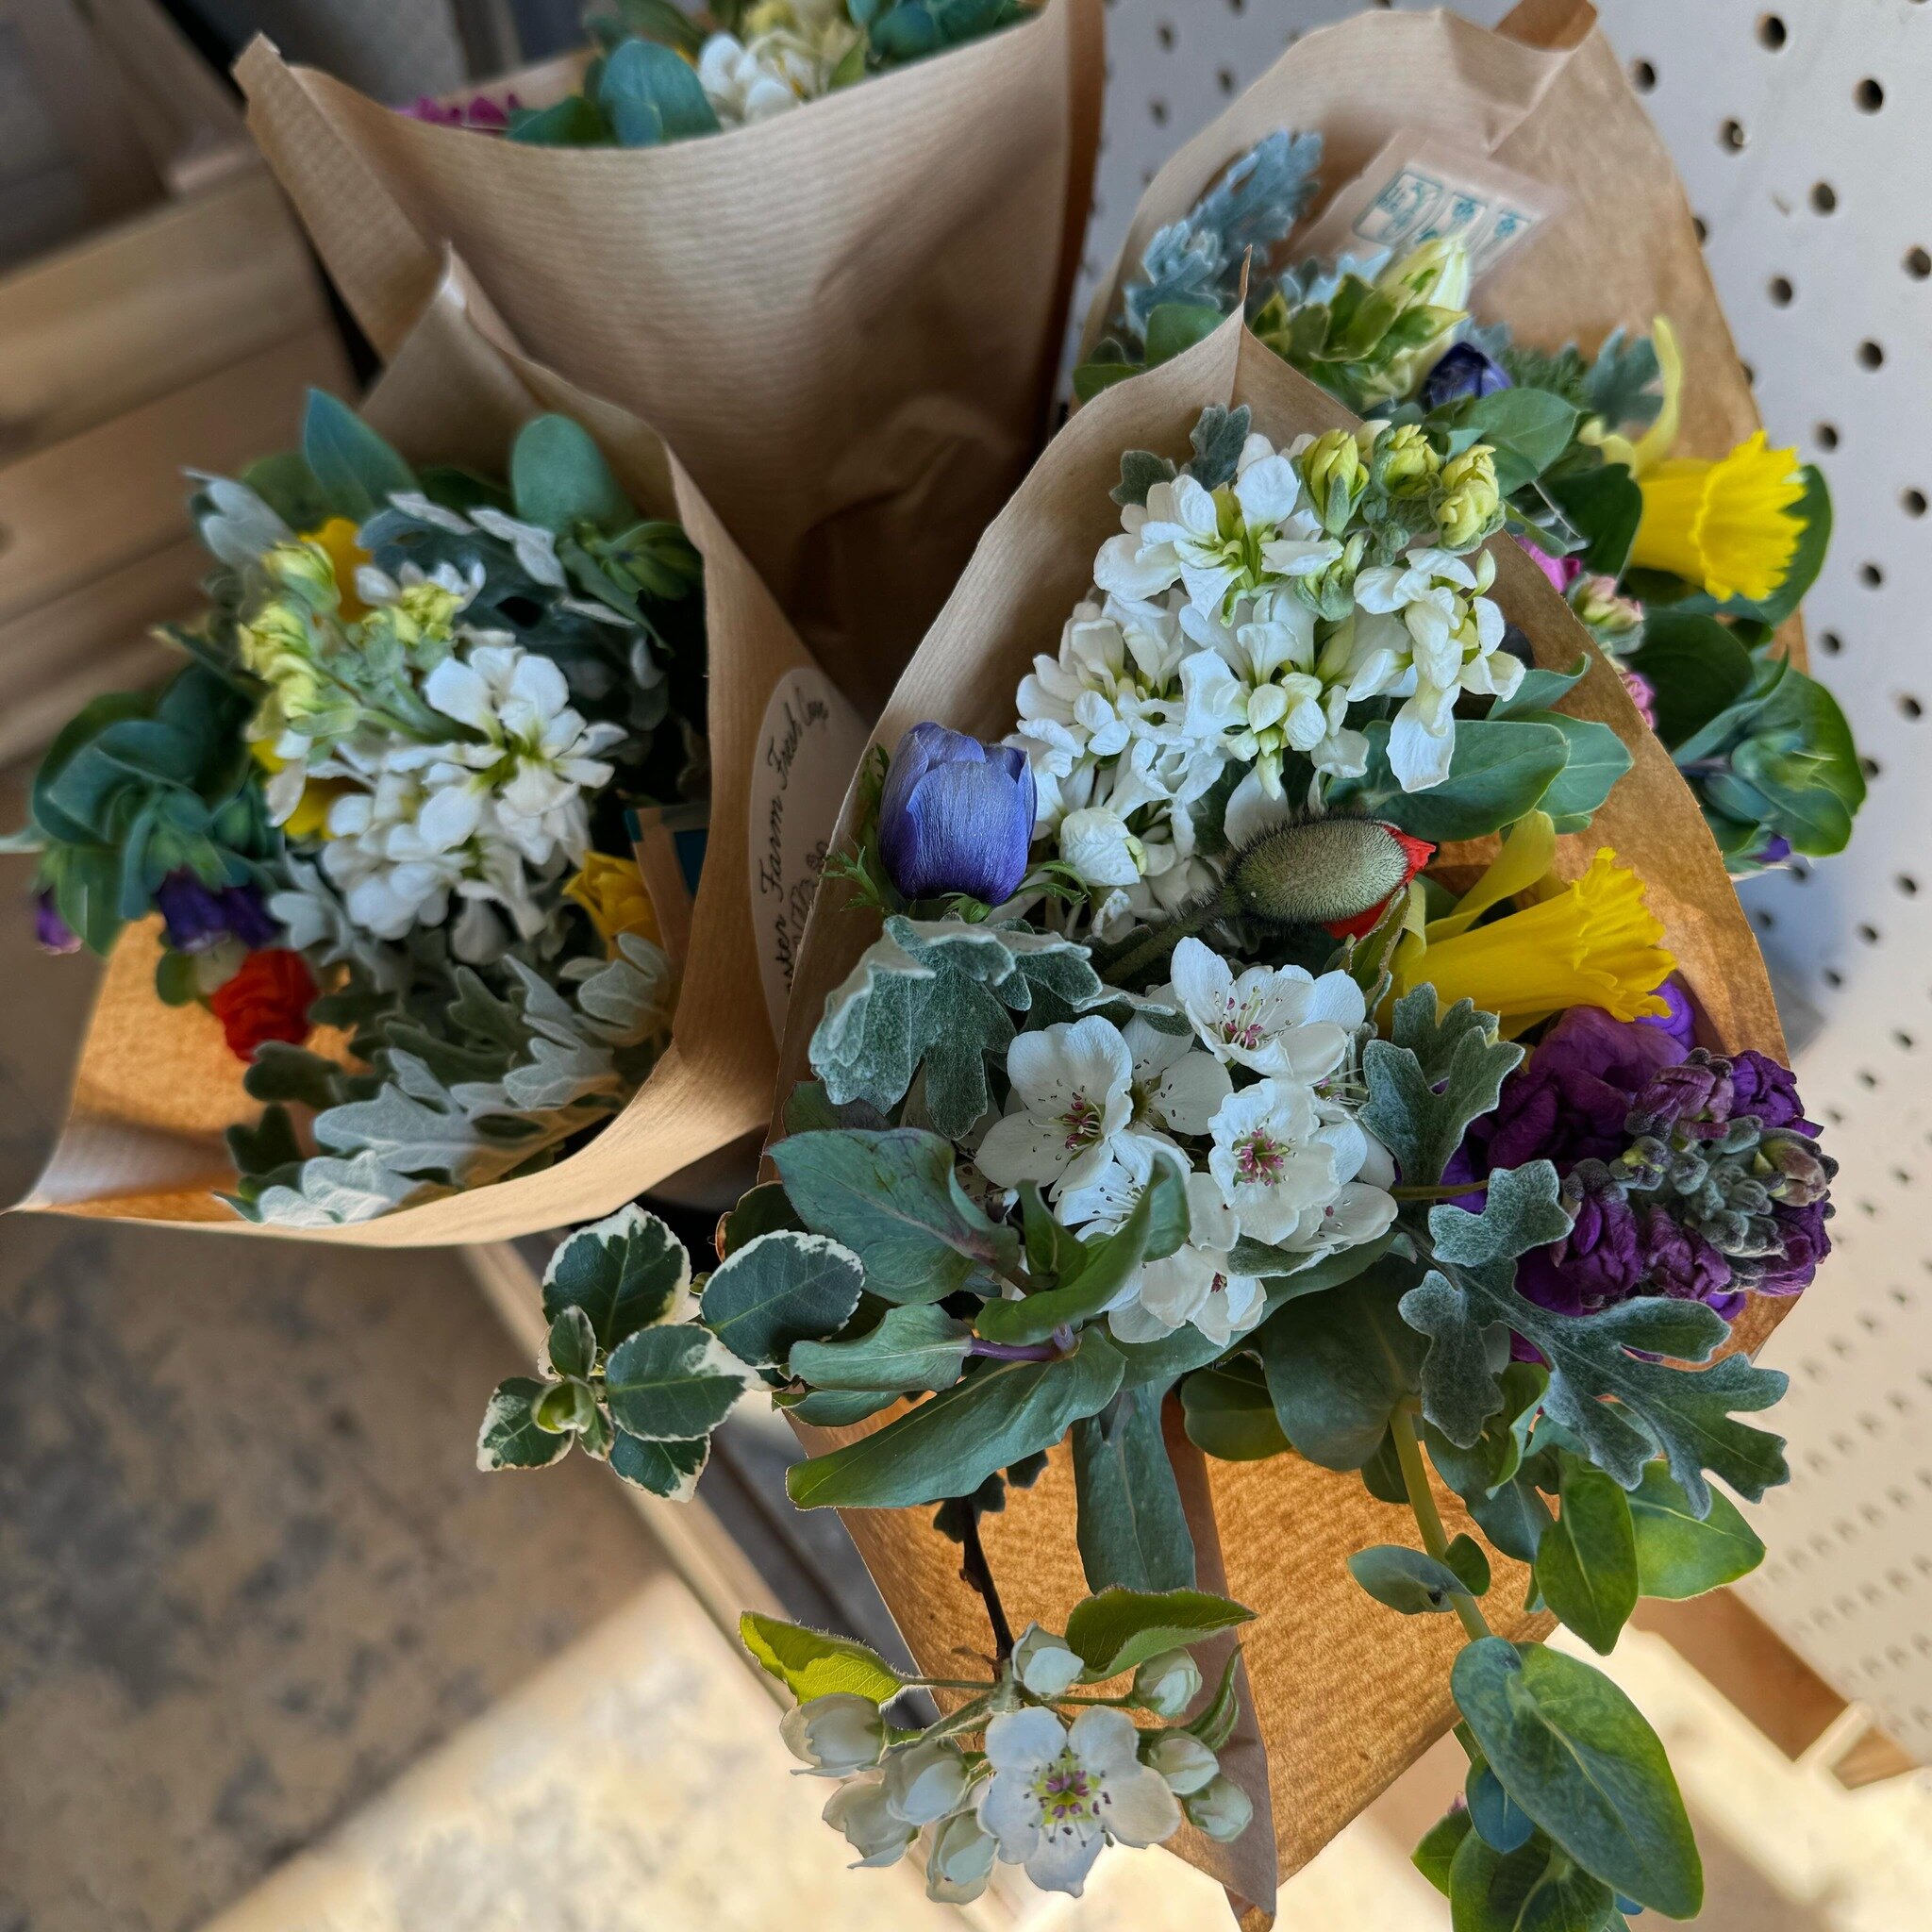 Spring is here! Whether it feels like it or not! Stop by the store today (open to all every Fri-Sun) and pick up a mini bouquet of beautiful local flowers from @lancasterfarmfresh 💐

[image: small white, yellow, blue, green, purple and red bouquets 